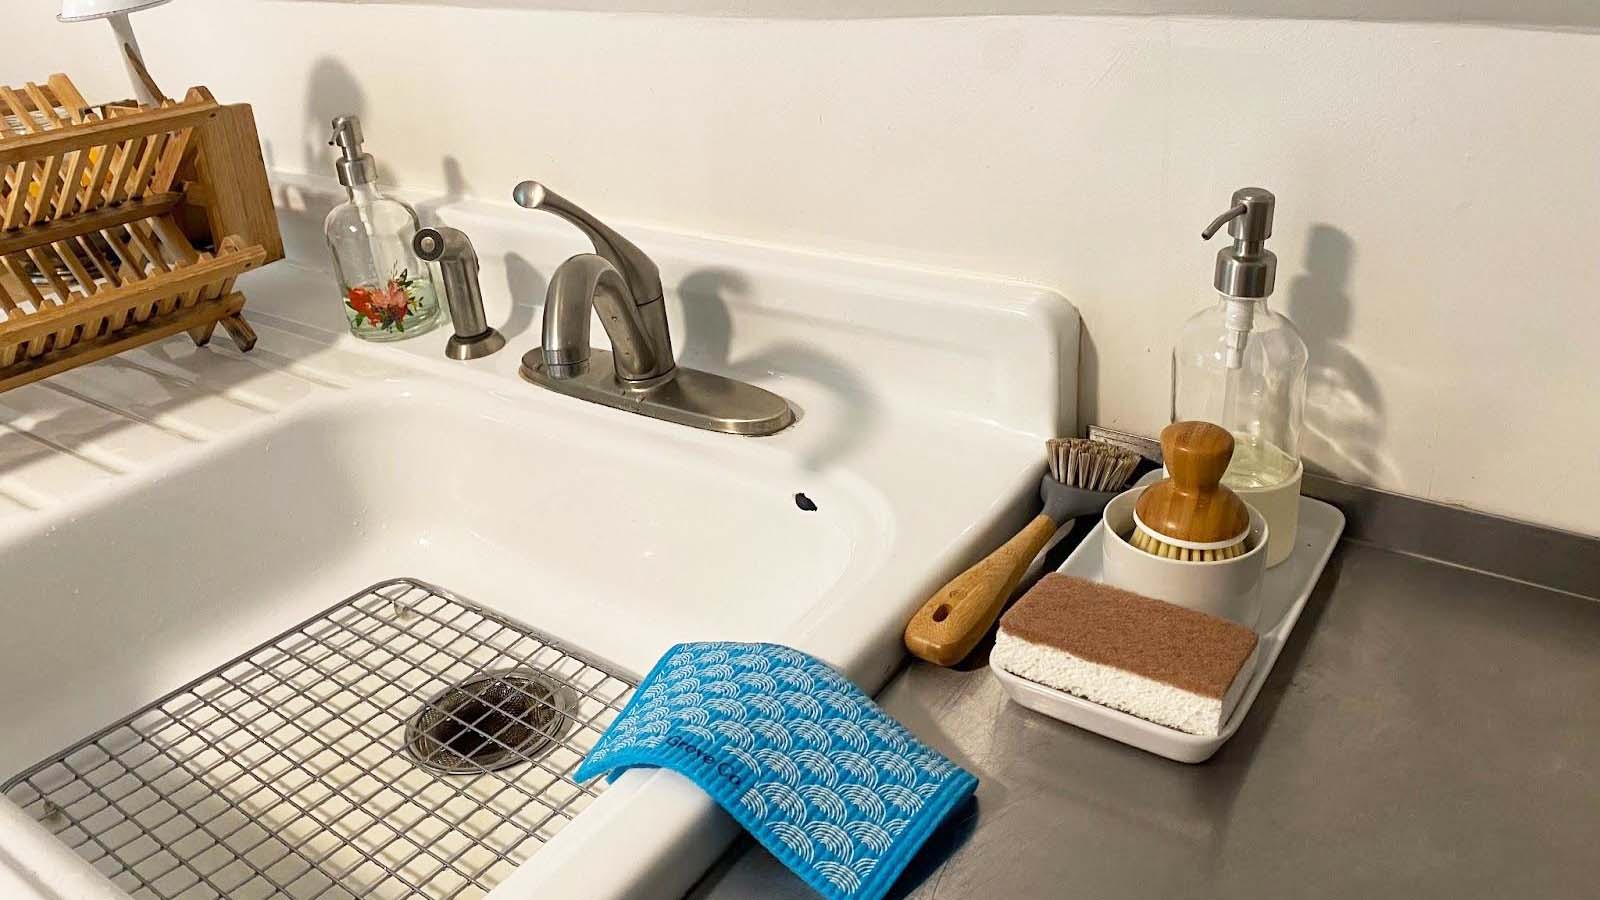 10 Products for Hand Washing Dishes, Shopping : Food Network